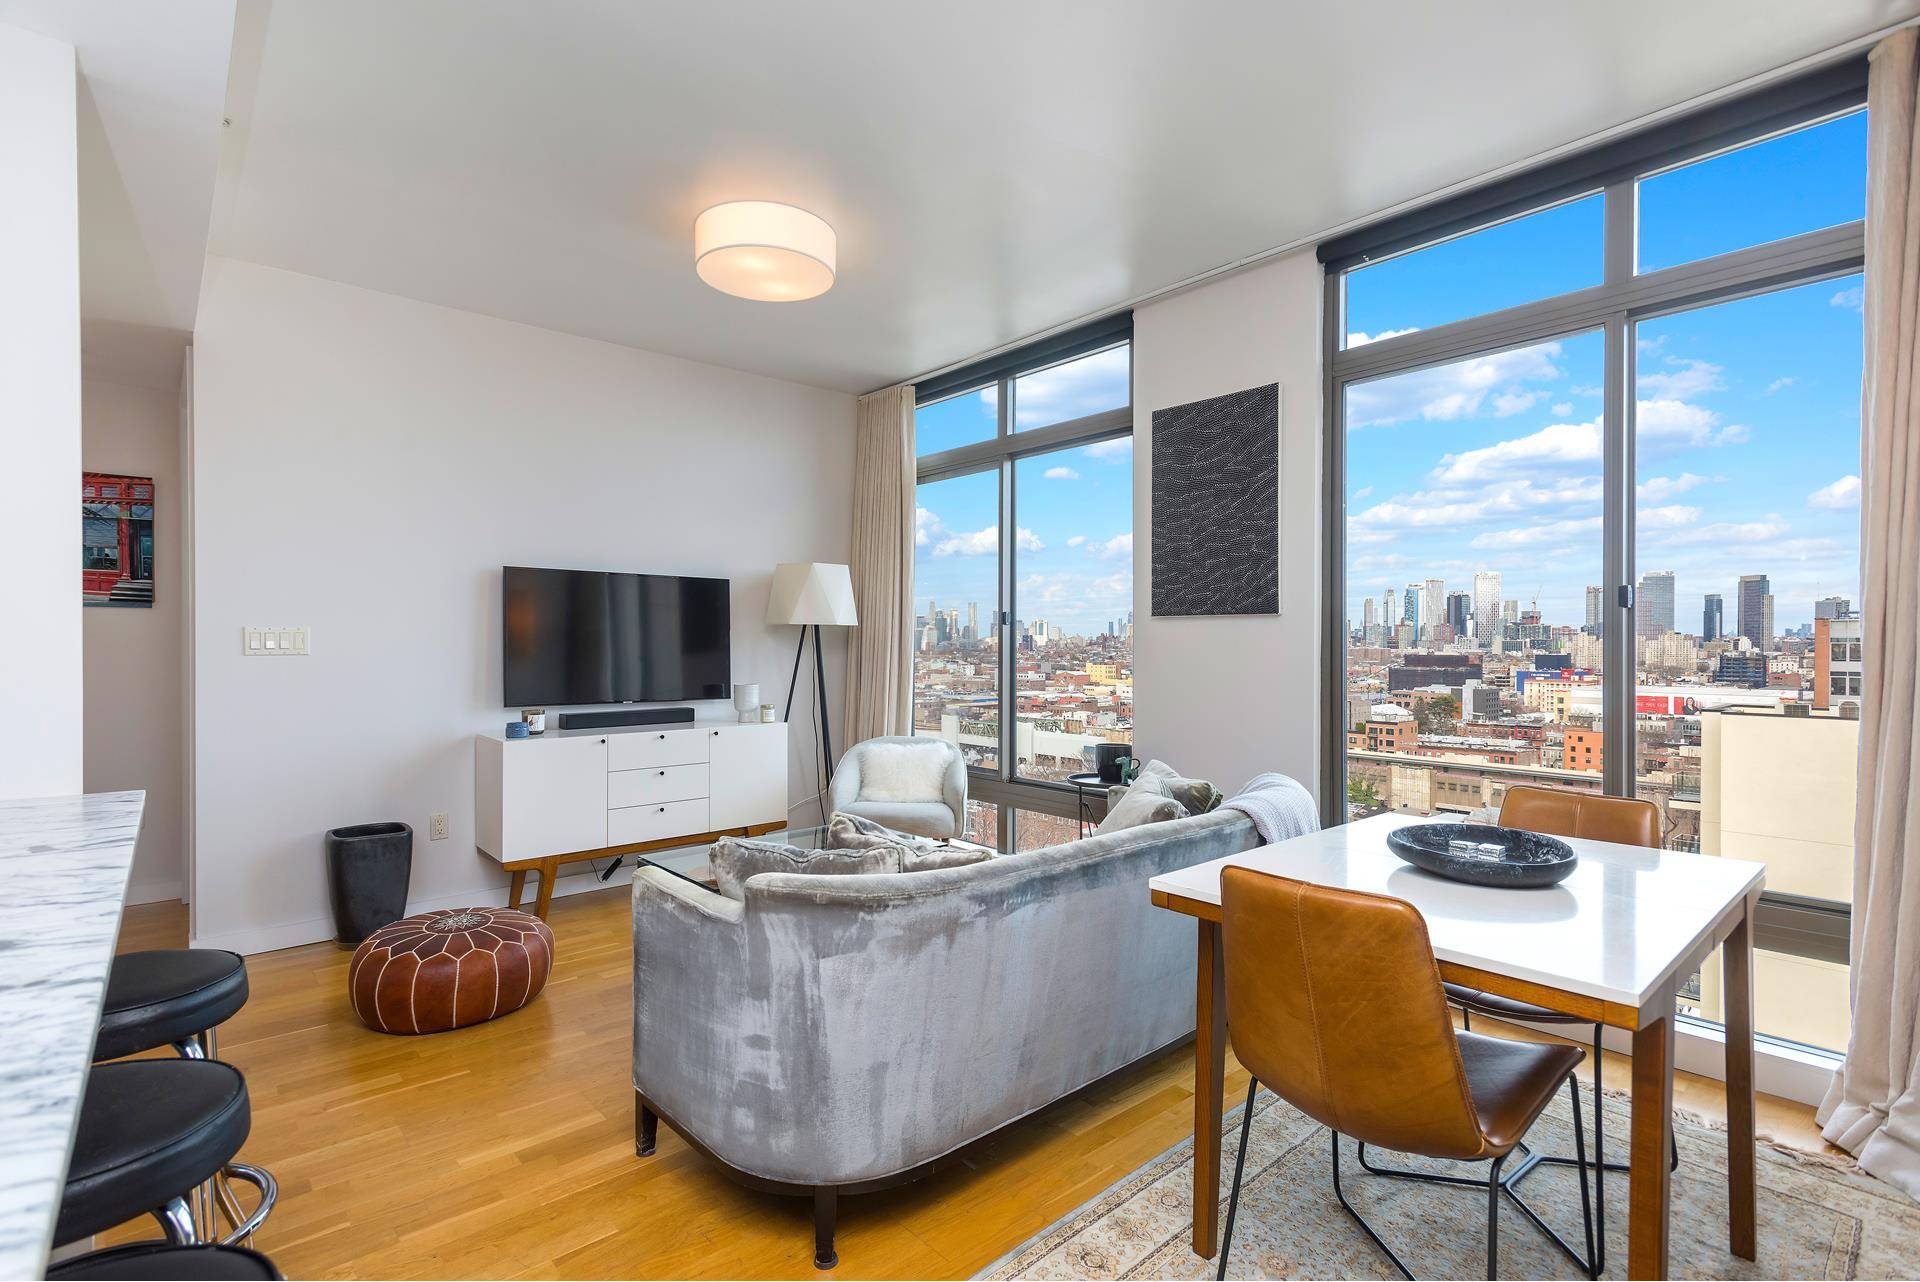 ONE MONTH FREE RENT ! PENTHOUSE 1BR home with full city views now available at 500 Fourth Avenue !